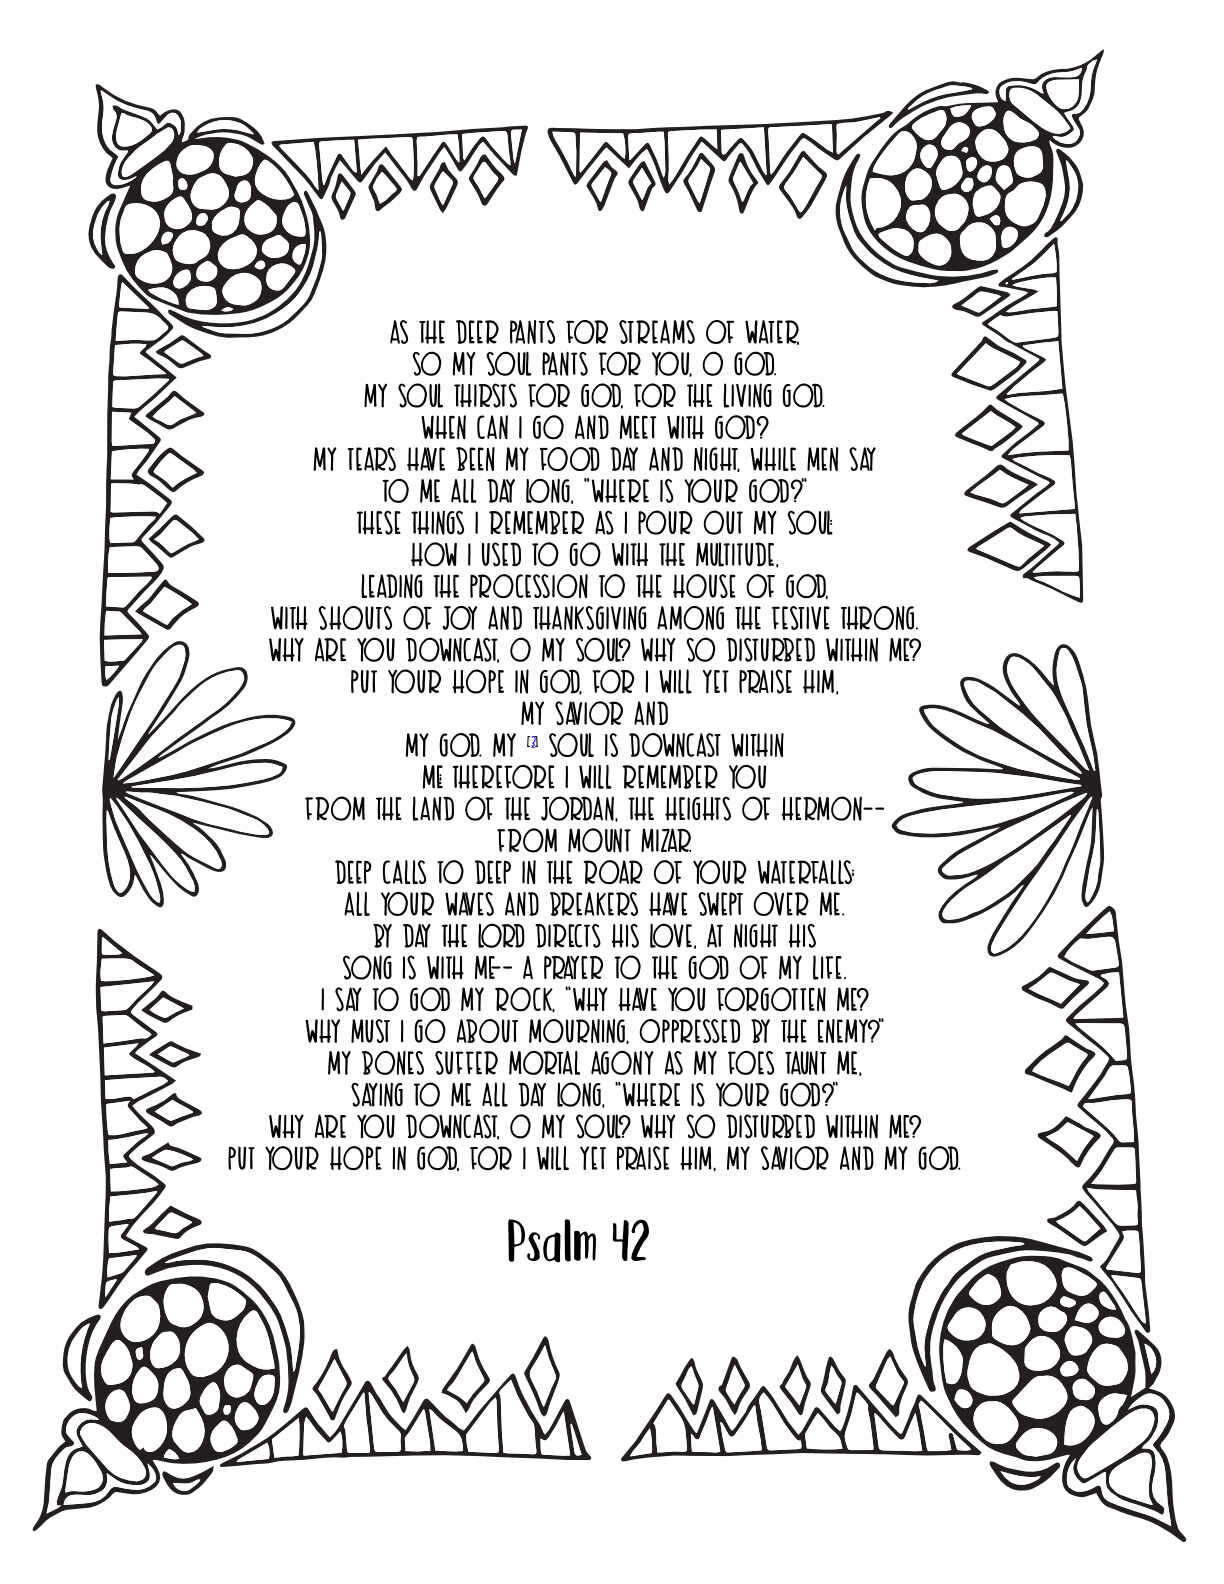 10 Free Printable Psalm Coloring Pages - Download and Color Adult Scripture - Psalm 42CLICK HERE TO DOWNLOAD THIS PAGE FREE